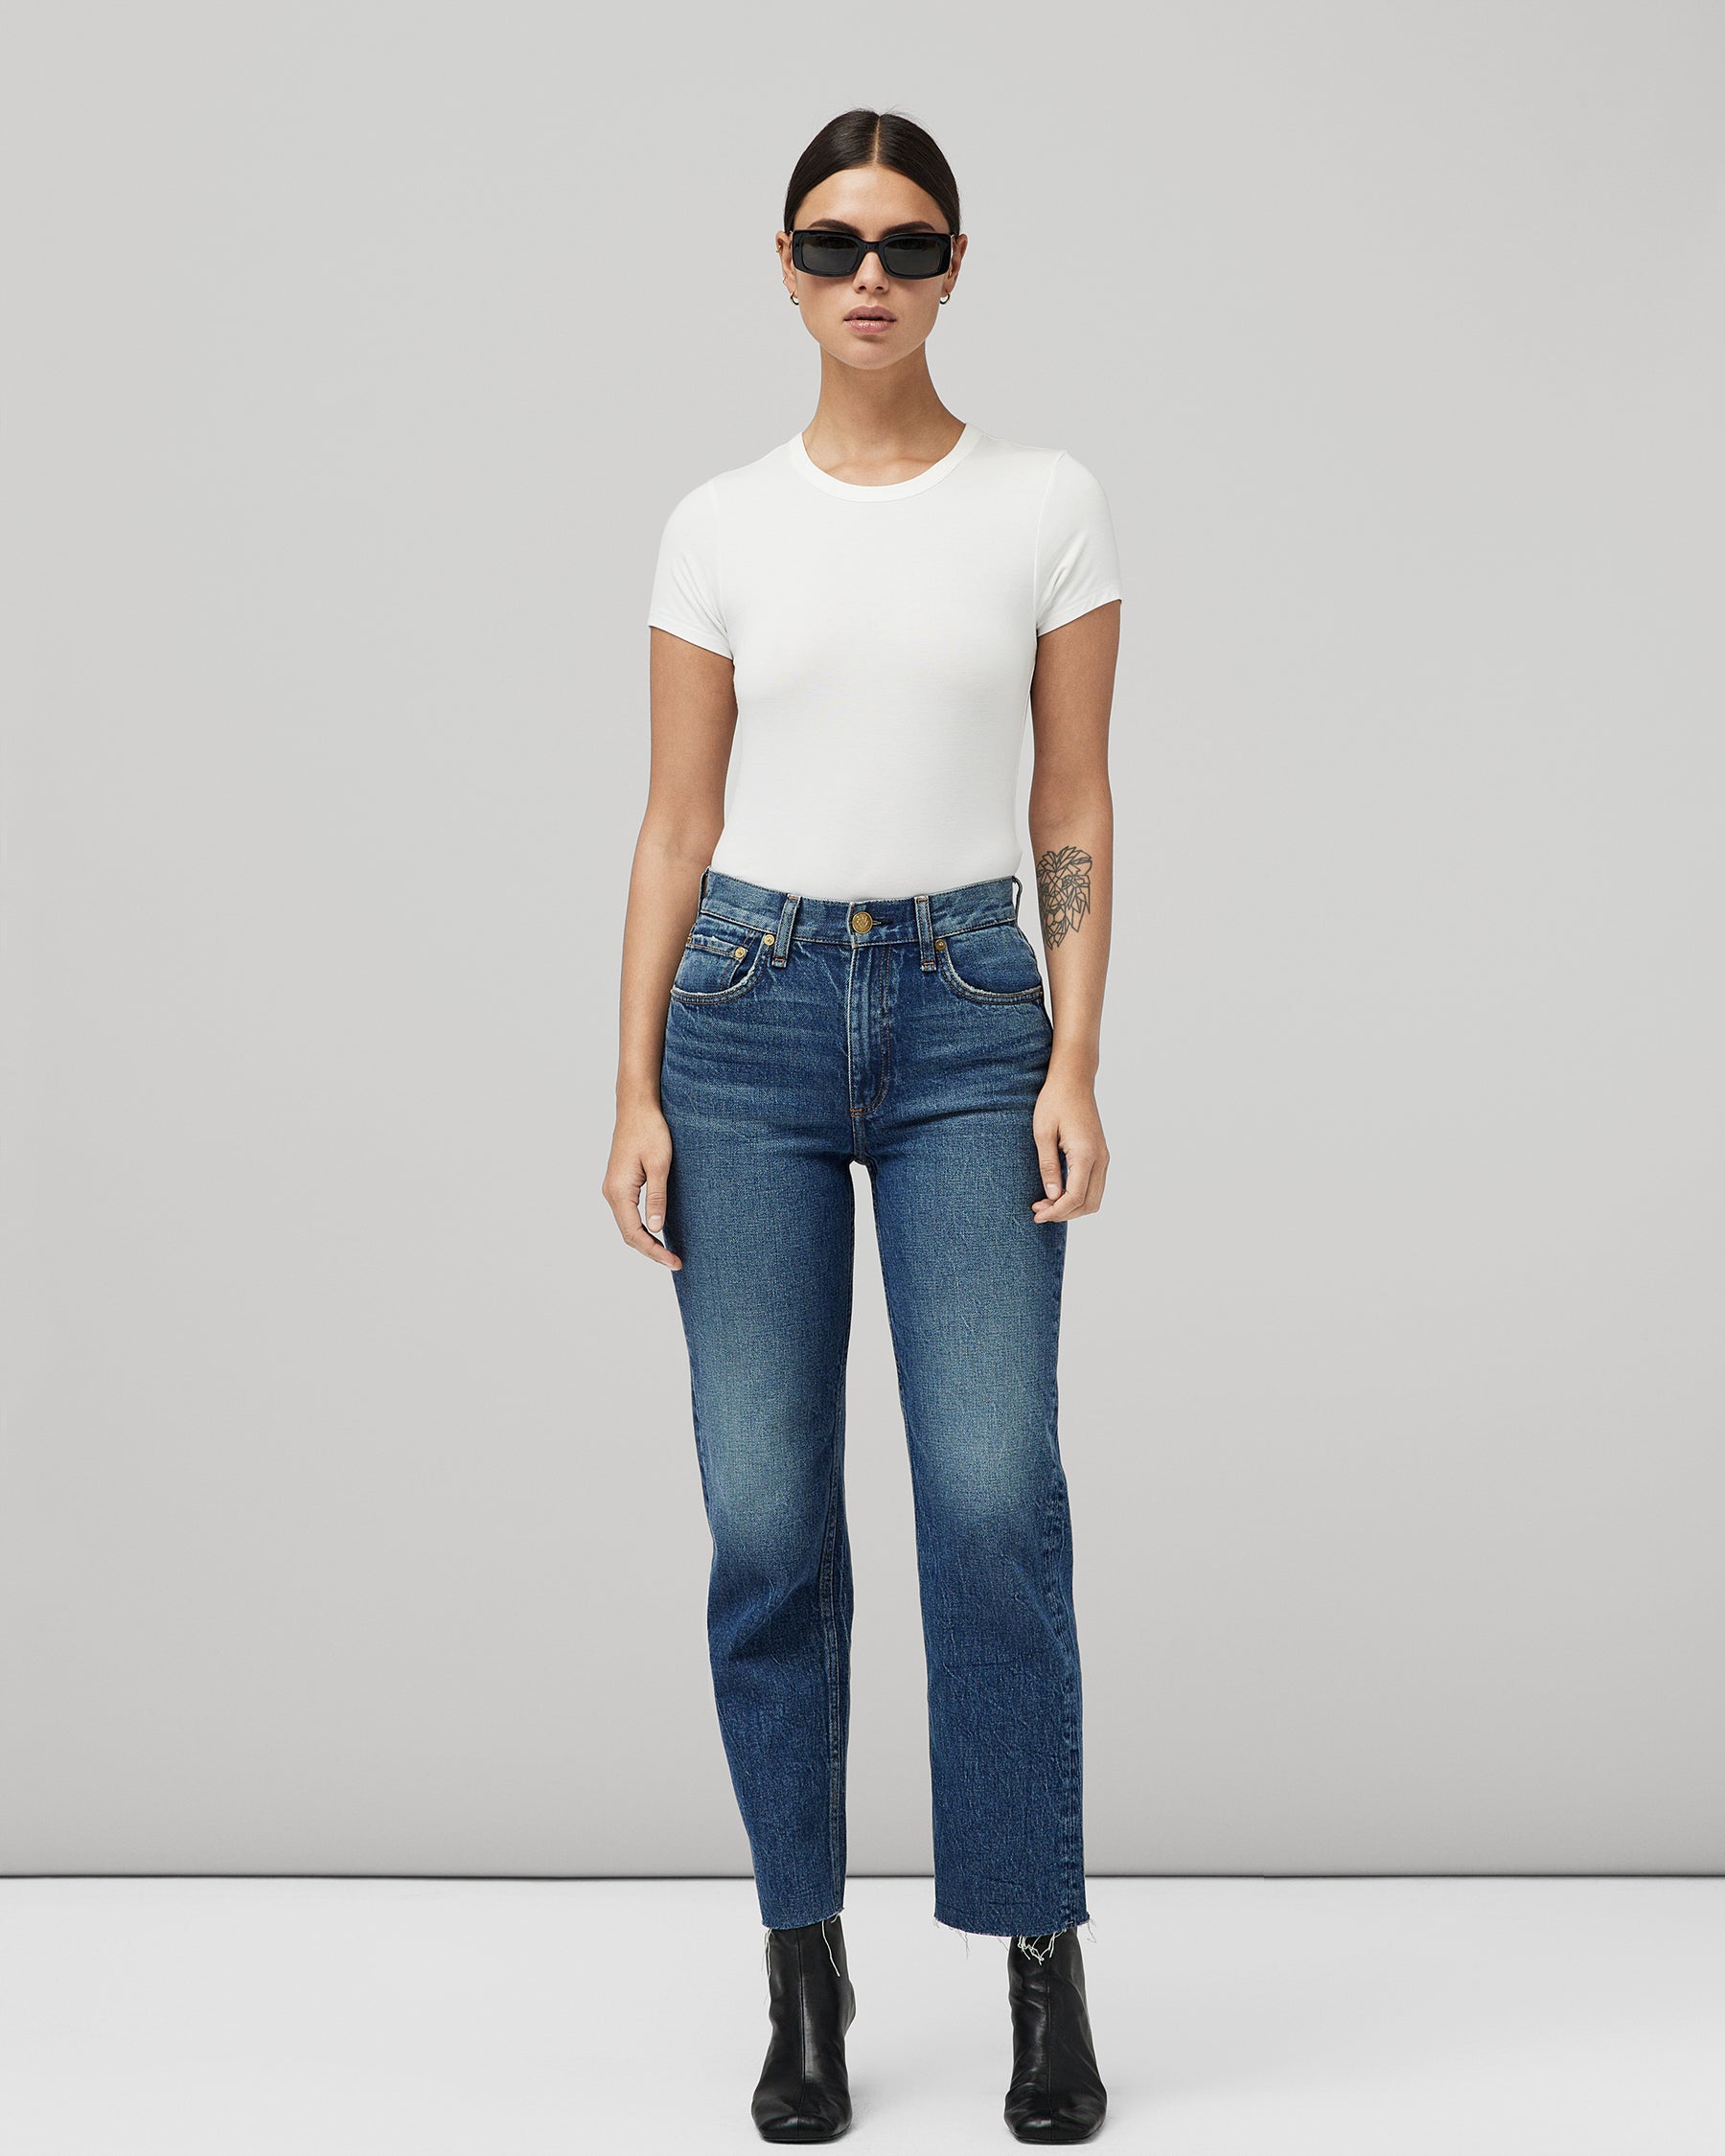 Harlow Straight - Lou: Mid-Rise Vintage Stretch Jean